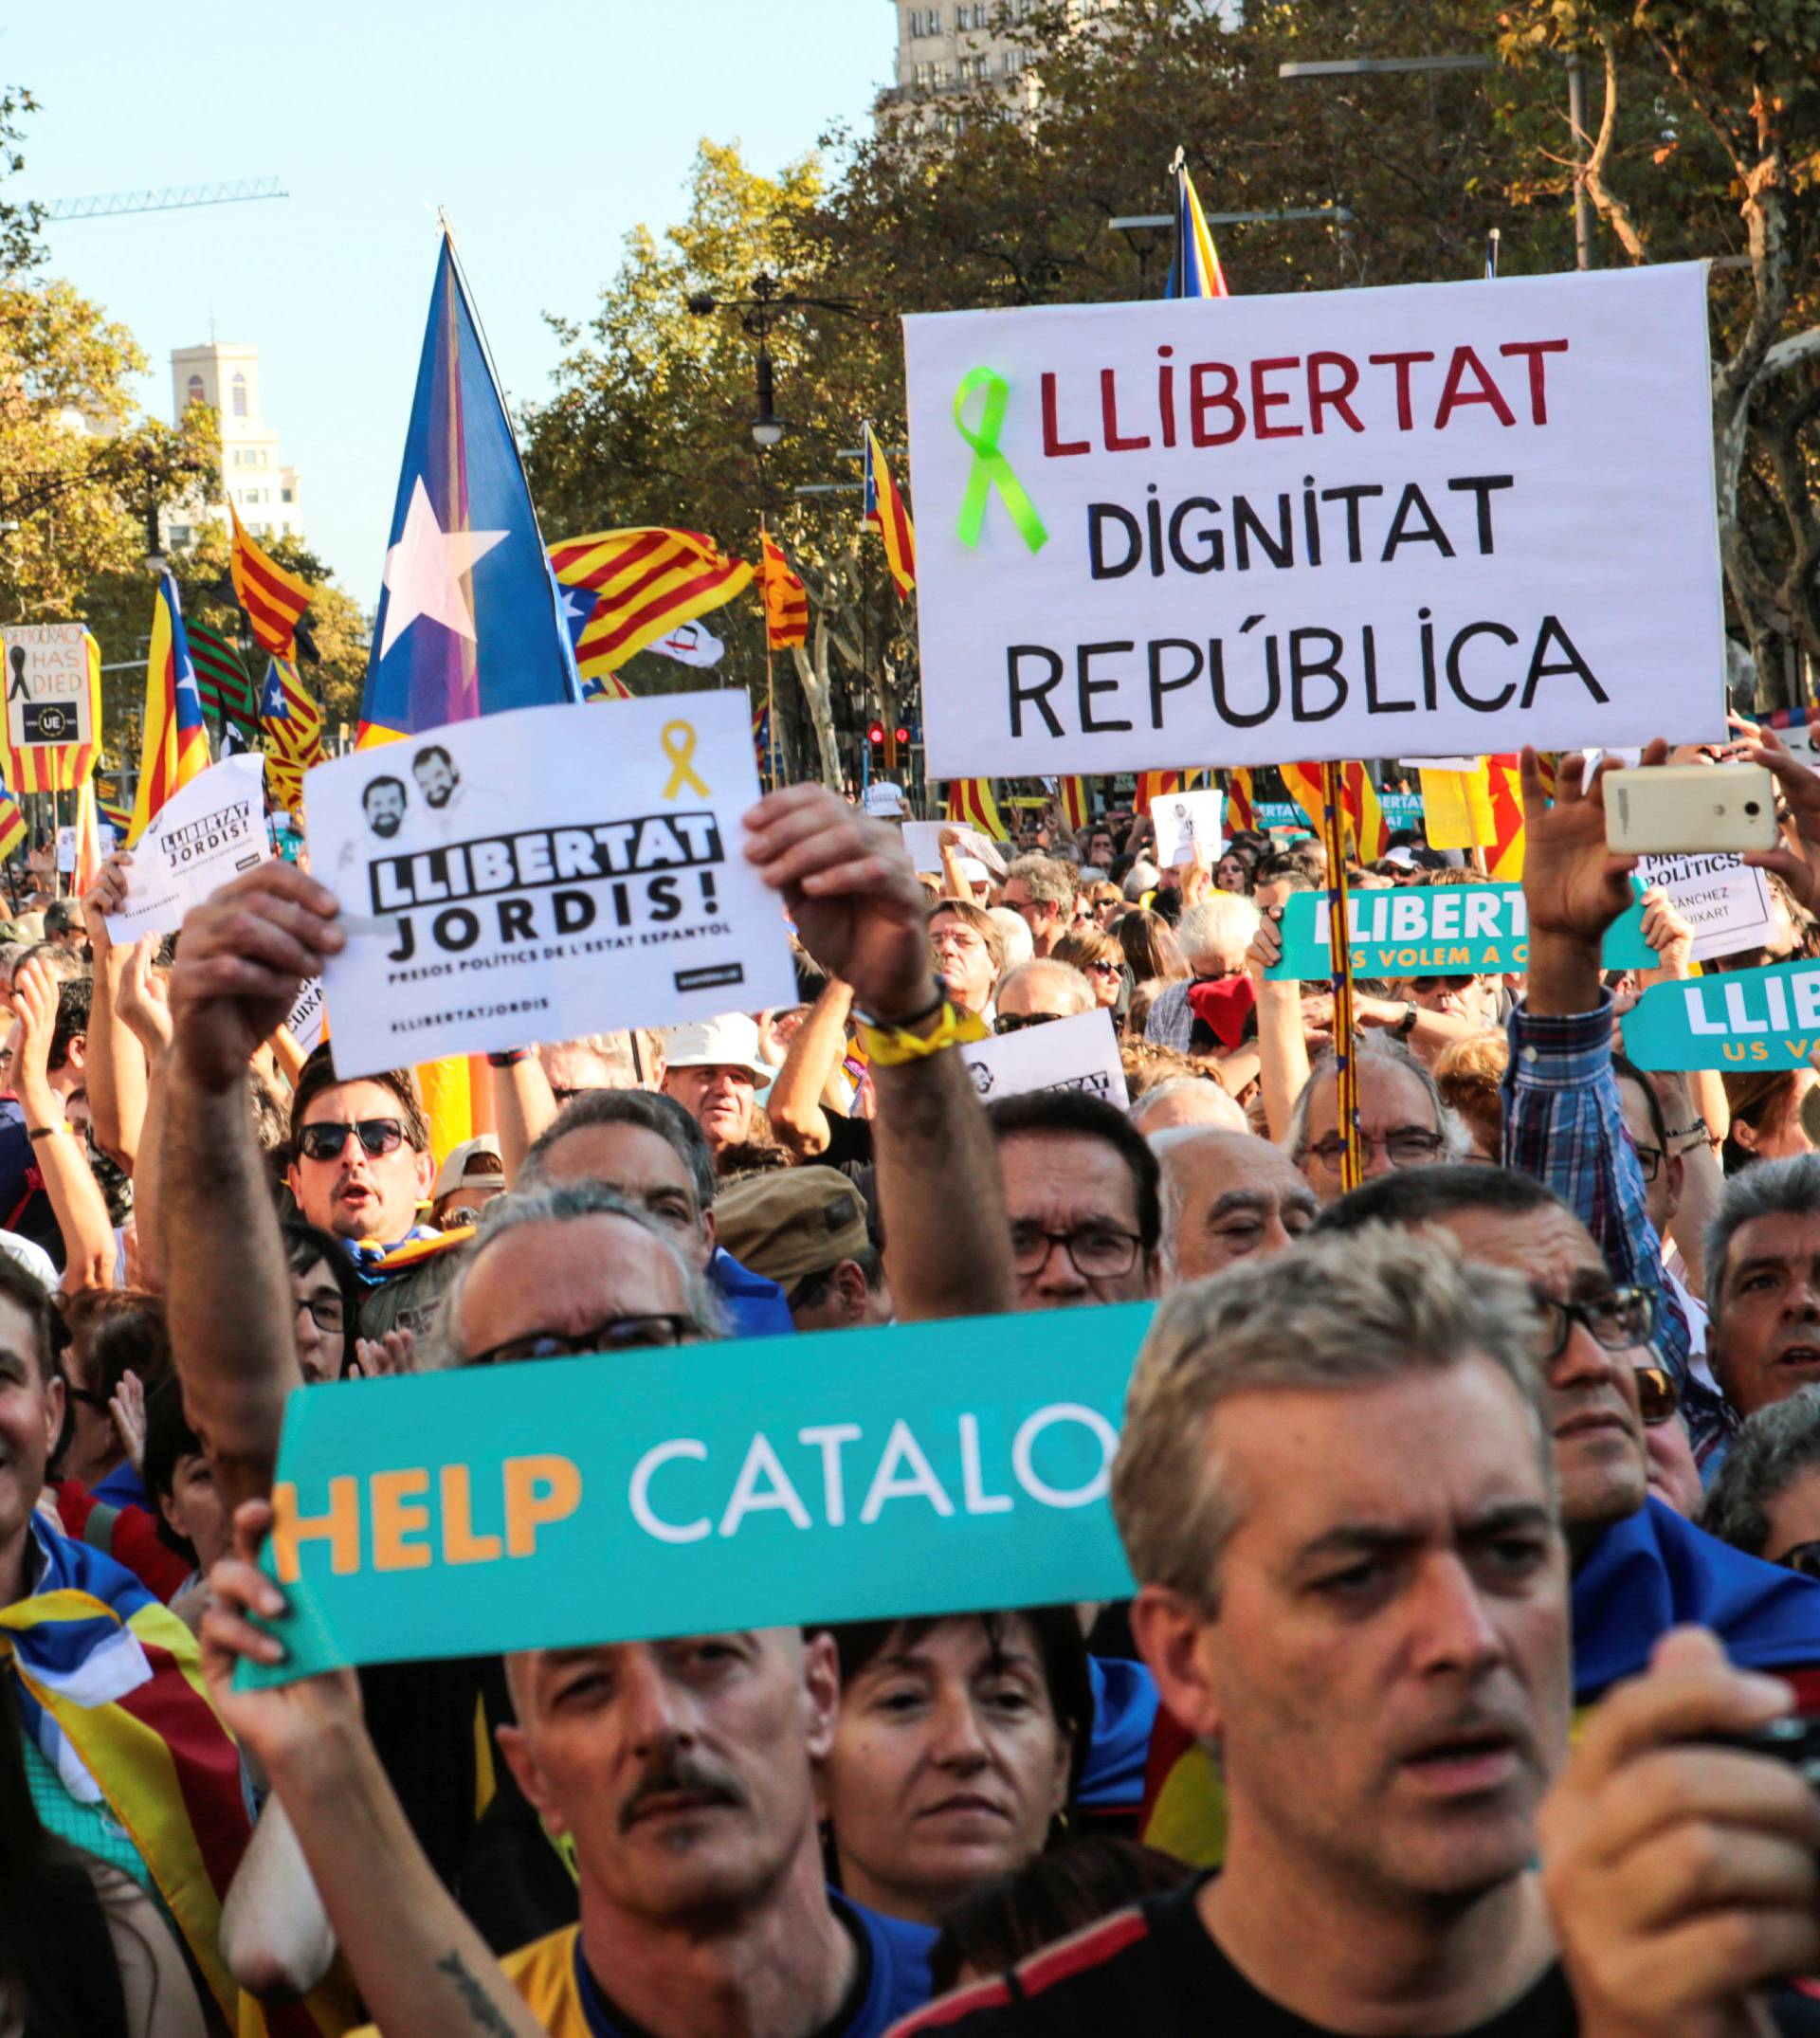 People hold banners and flags during a demonstration organised by Catalan pro-independence movements ANC (Catalan National Assembly) and Omnium Cutural, following the imprisonment of their two leaders, in Barcelona